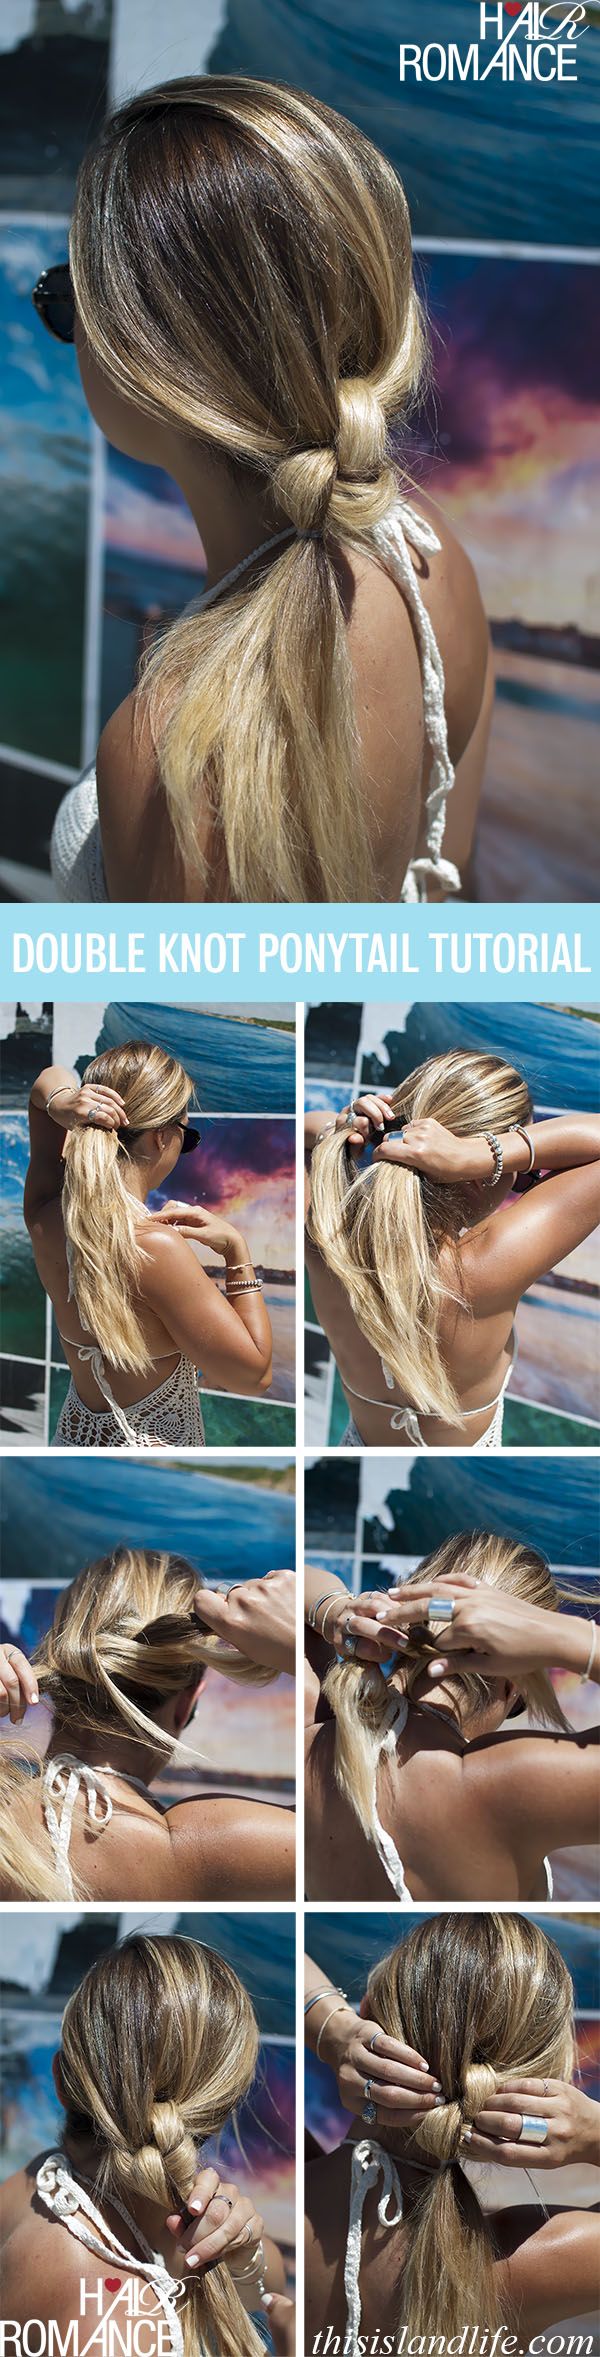 Double Knotted ponytail Tutorial